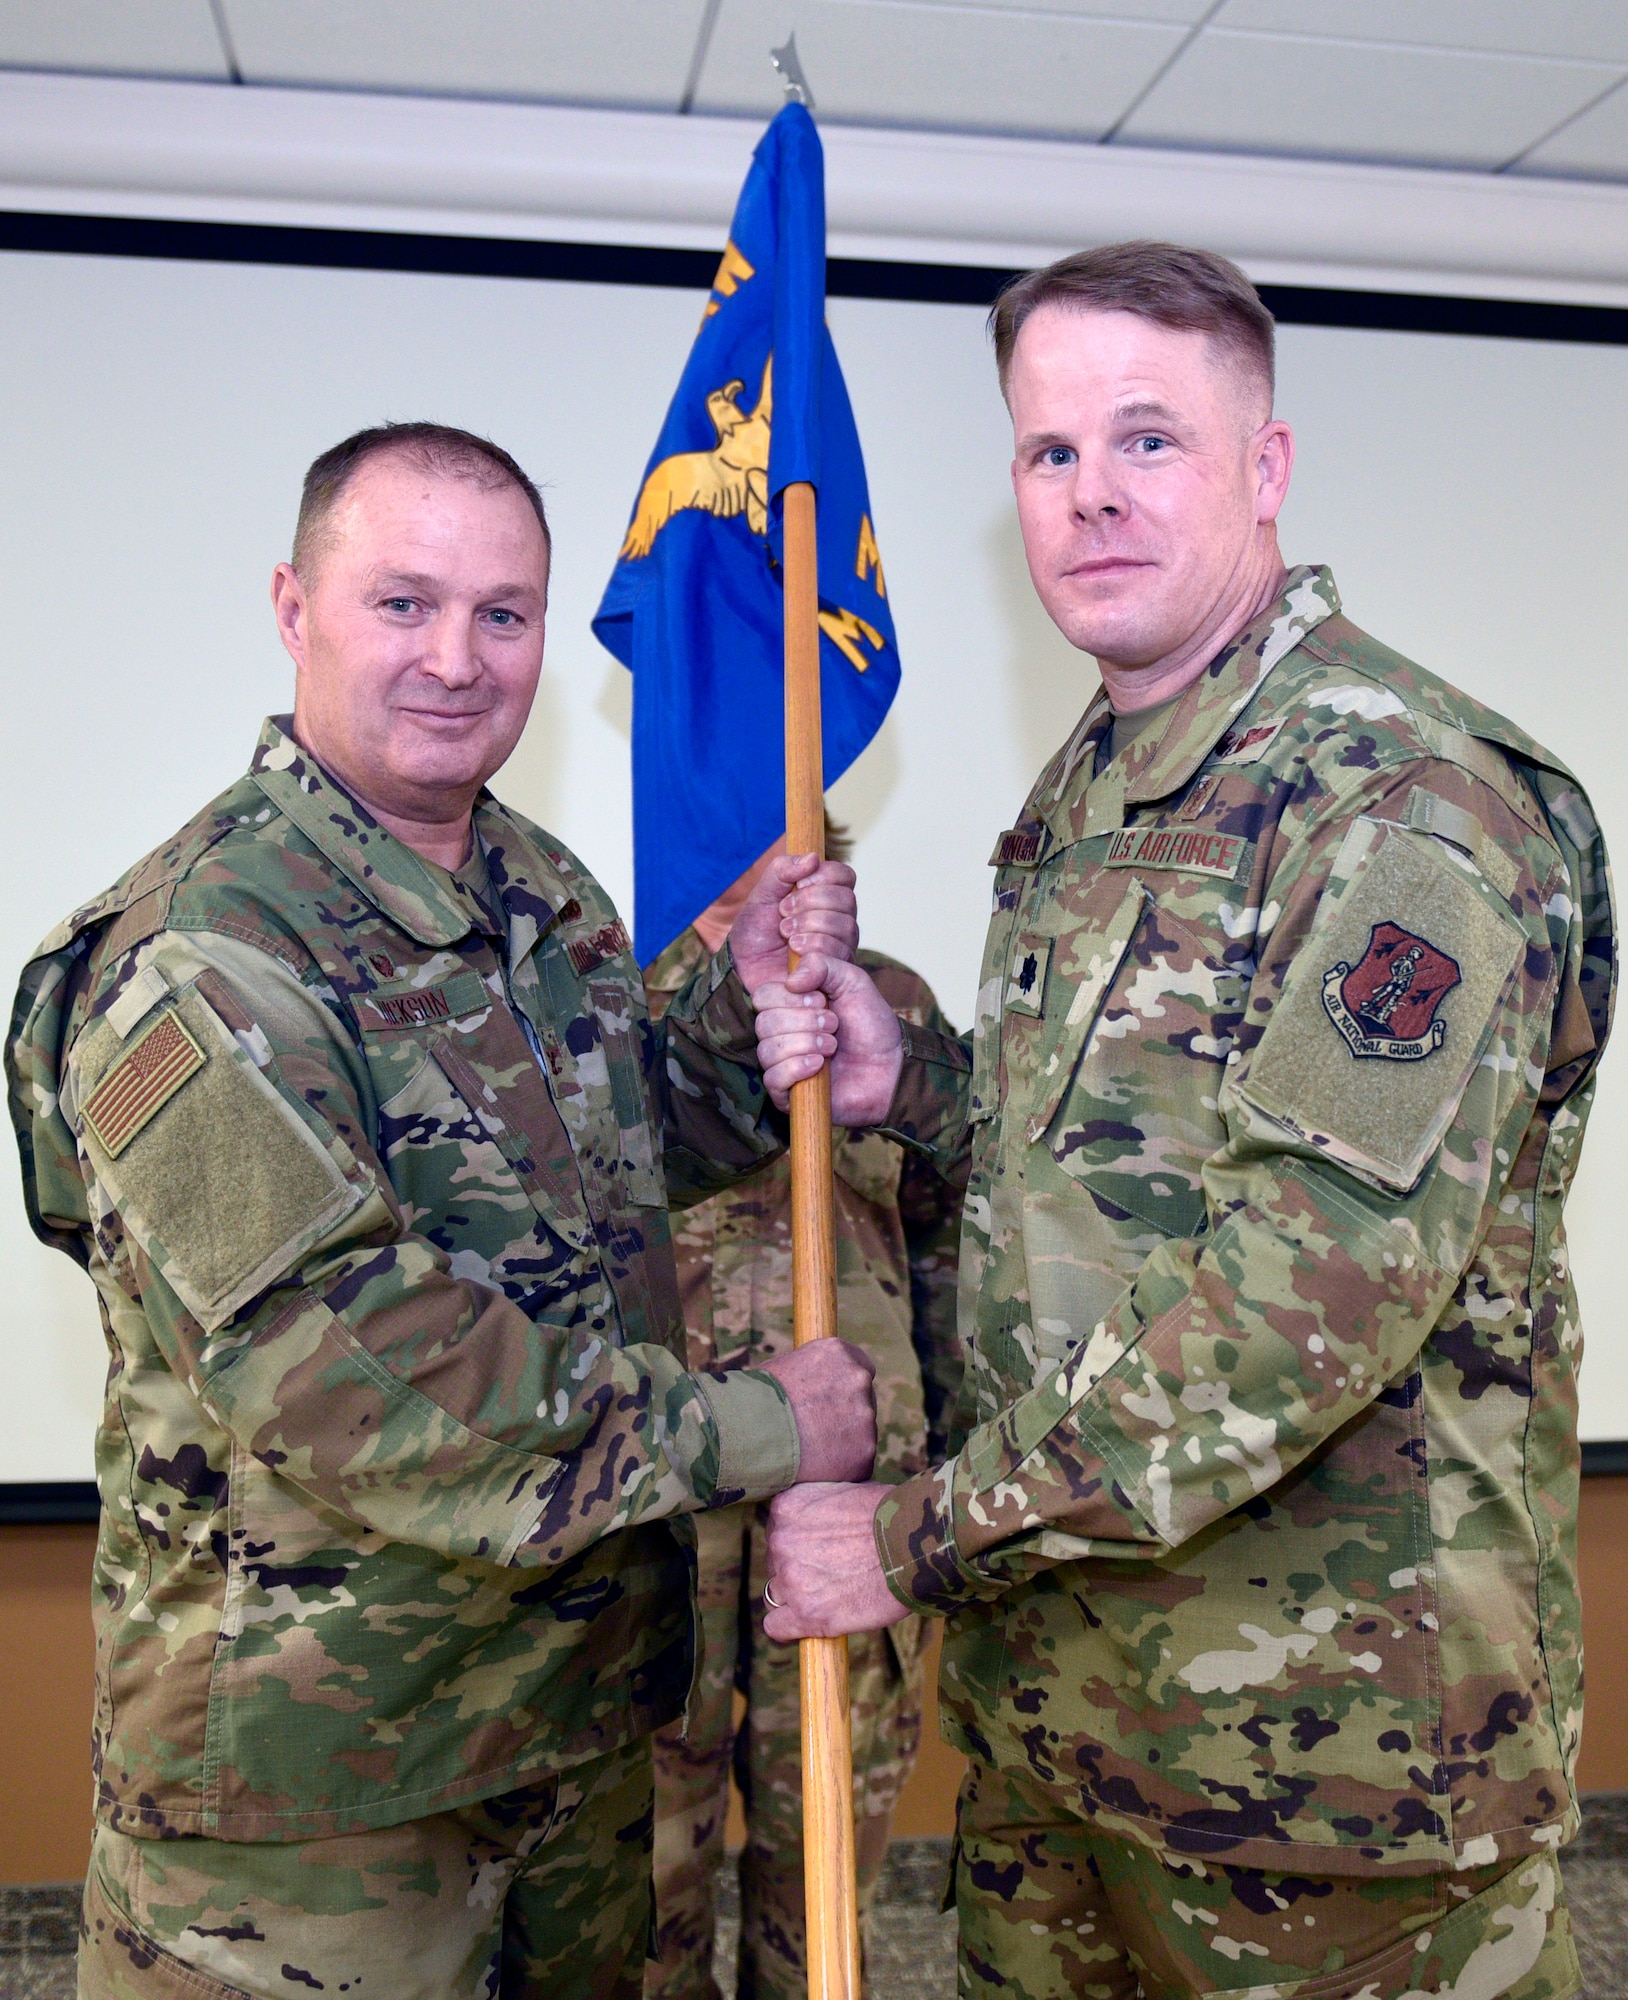 Lt. Col. Jonathan Bingham accepts the 120th Medical Group guideon from Col. Buel Dickson, 120th Airlift Wing Commander, as part of the change of command ceremony Nov. 3, 2019 here. Bingham was selected as the new commander of the 120th MDG.